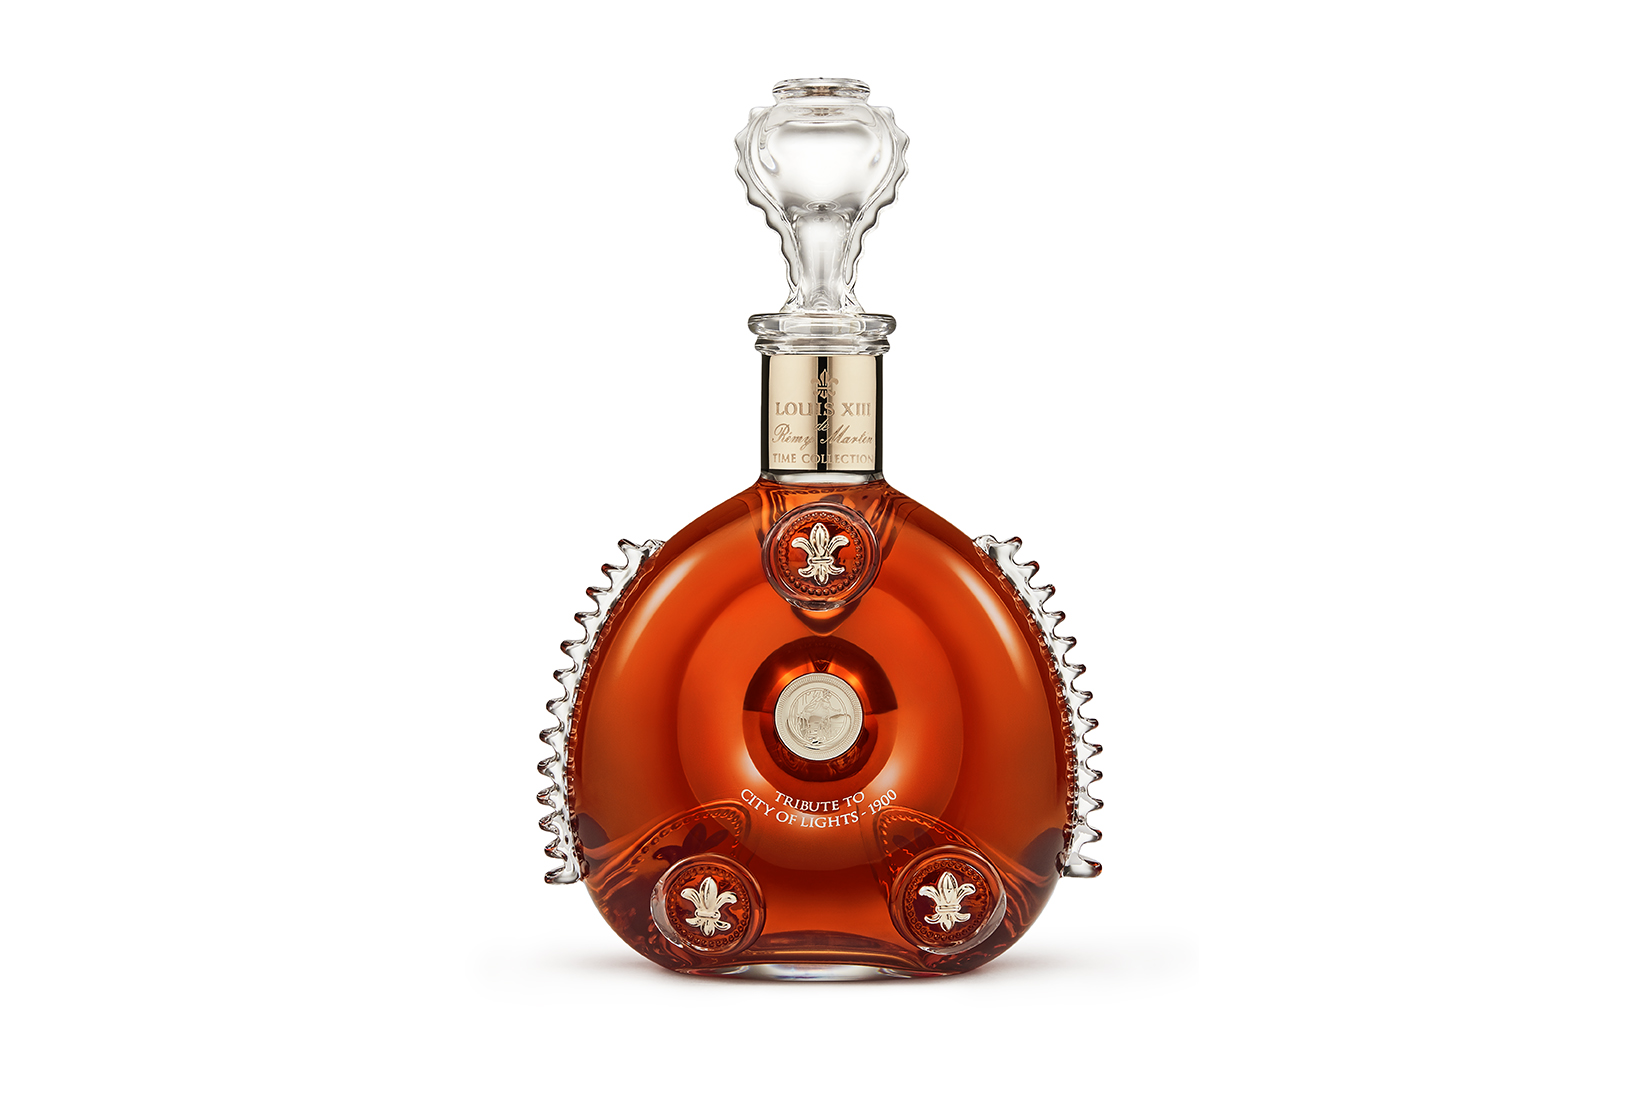 Drinking ahead: The LOUIS XIII Time Collection with NFC Tech